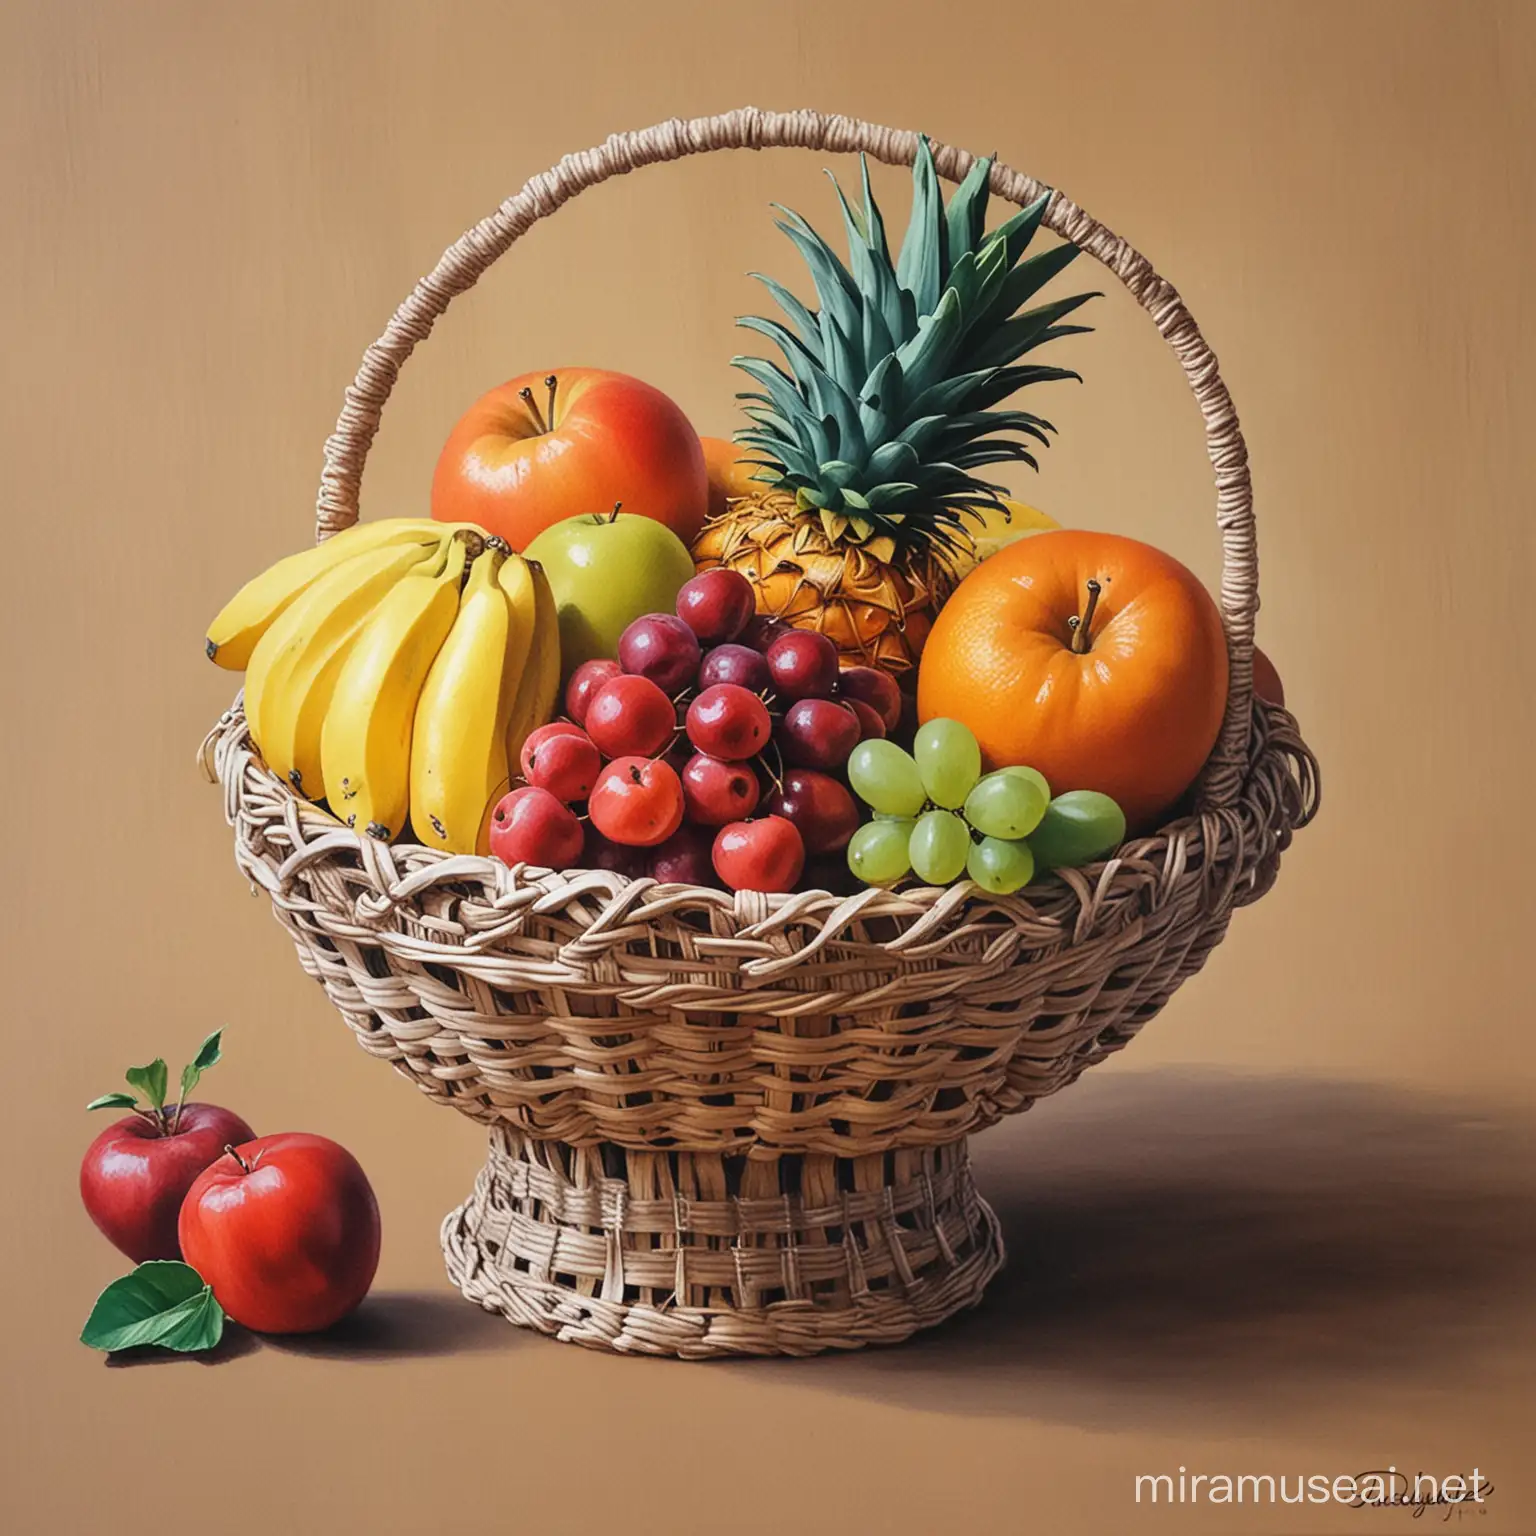 Colorful Acrylic Painting of a Fruit Basket